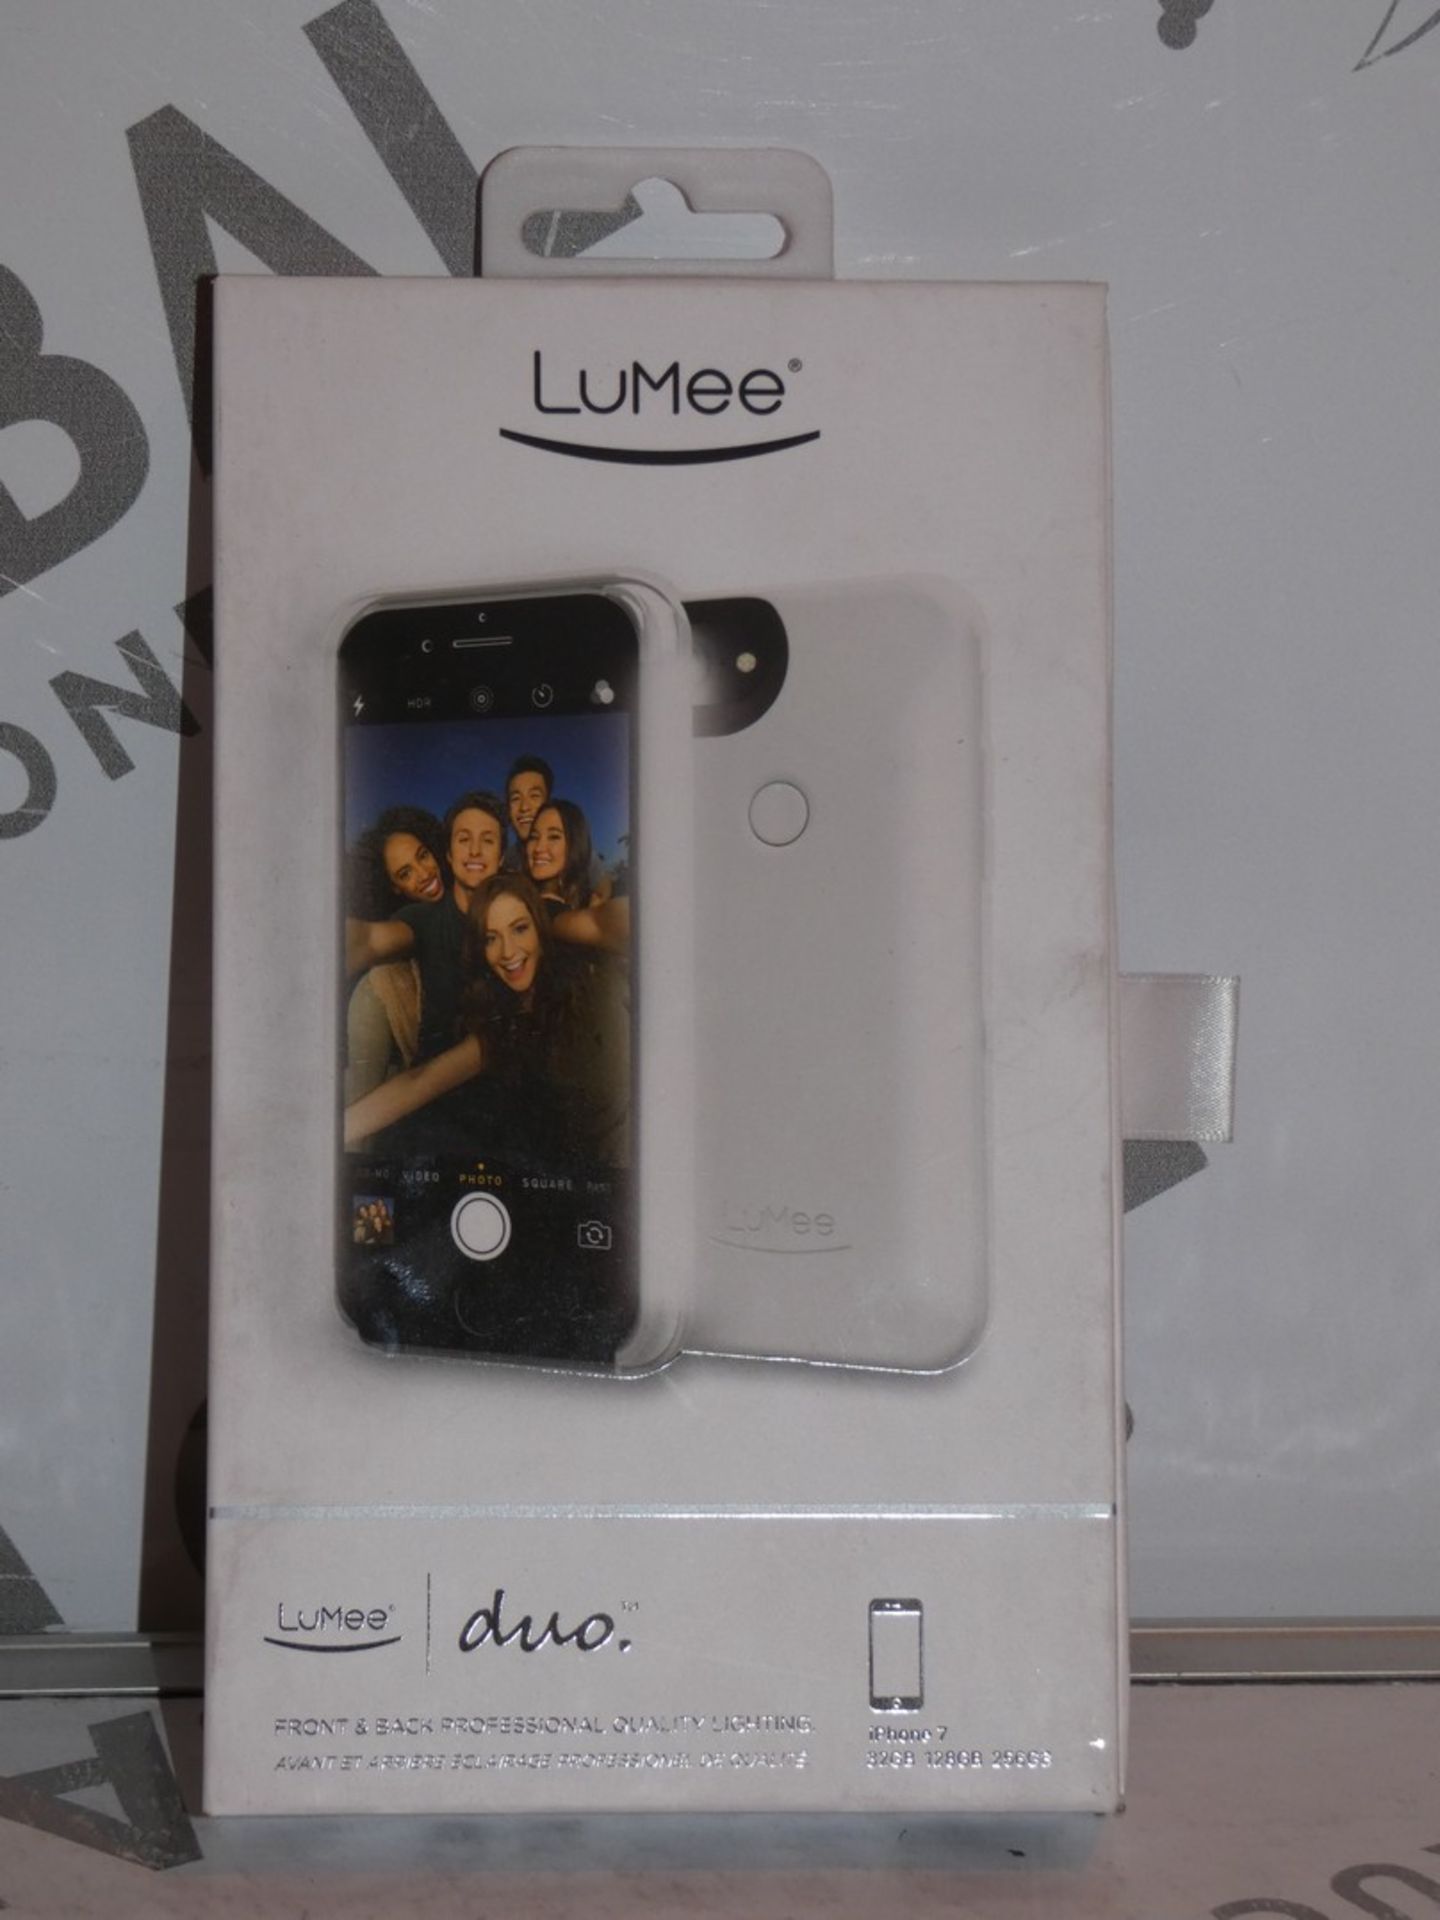 Lot to Contain 2 Lumee Duo Iphone 7 Professional Quality Lighting Phone Cases Combined RRP £150